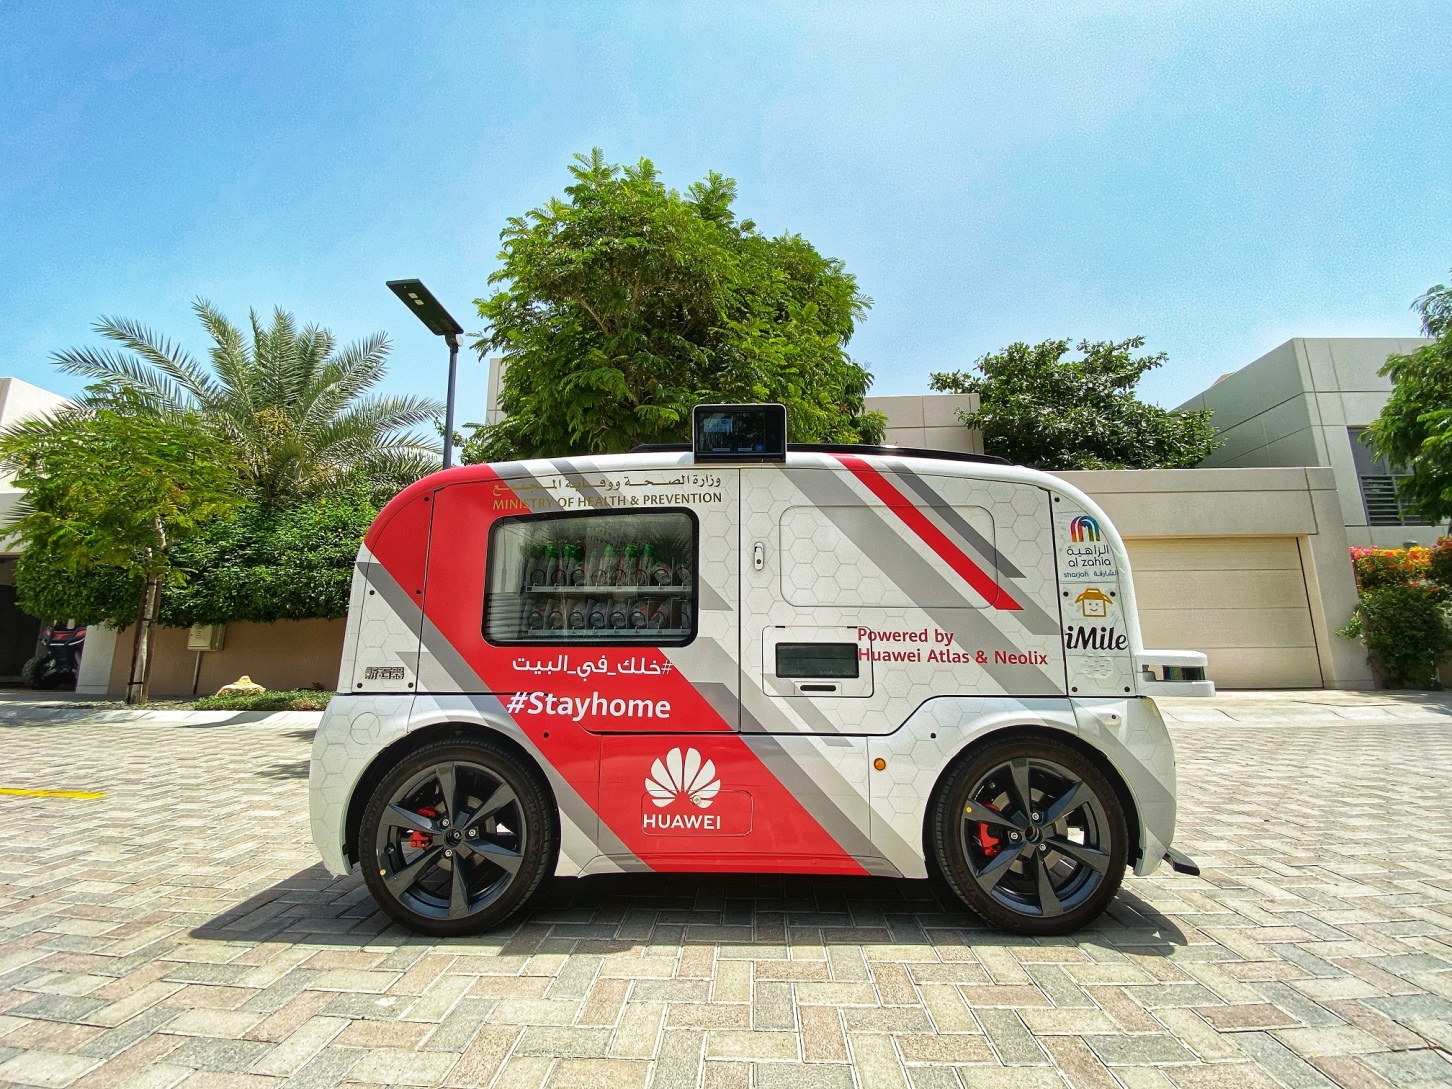 UAE to Deploy Autonomous Vehicles in the Community to Support Residents Amid the Coronavirus Pandemic